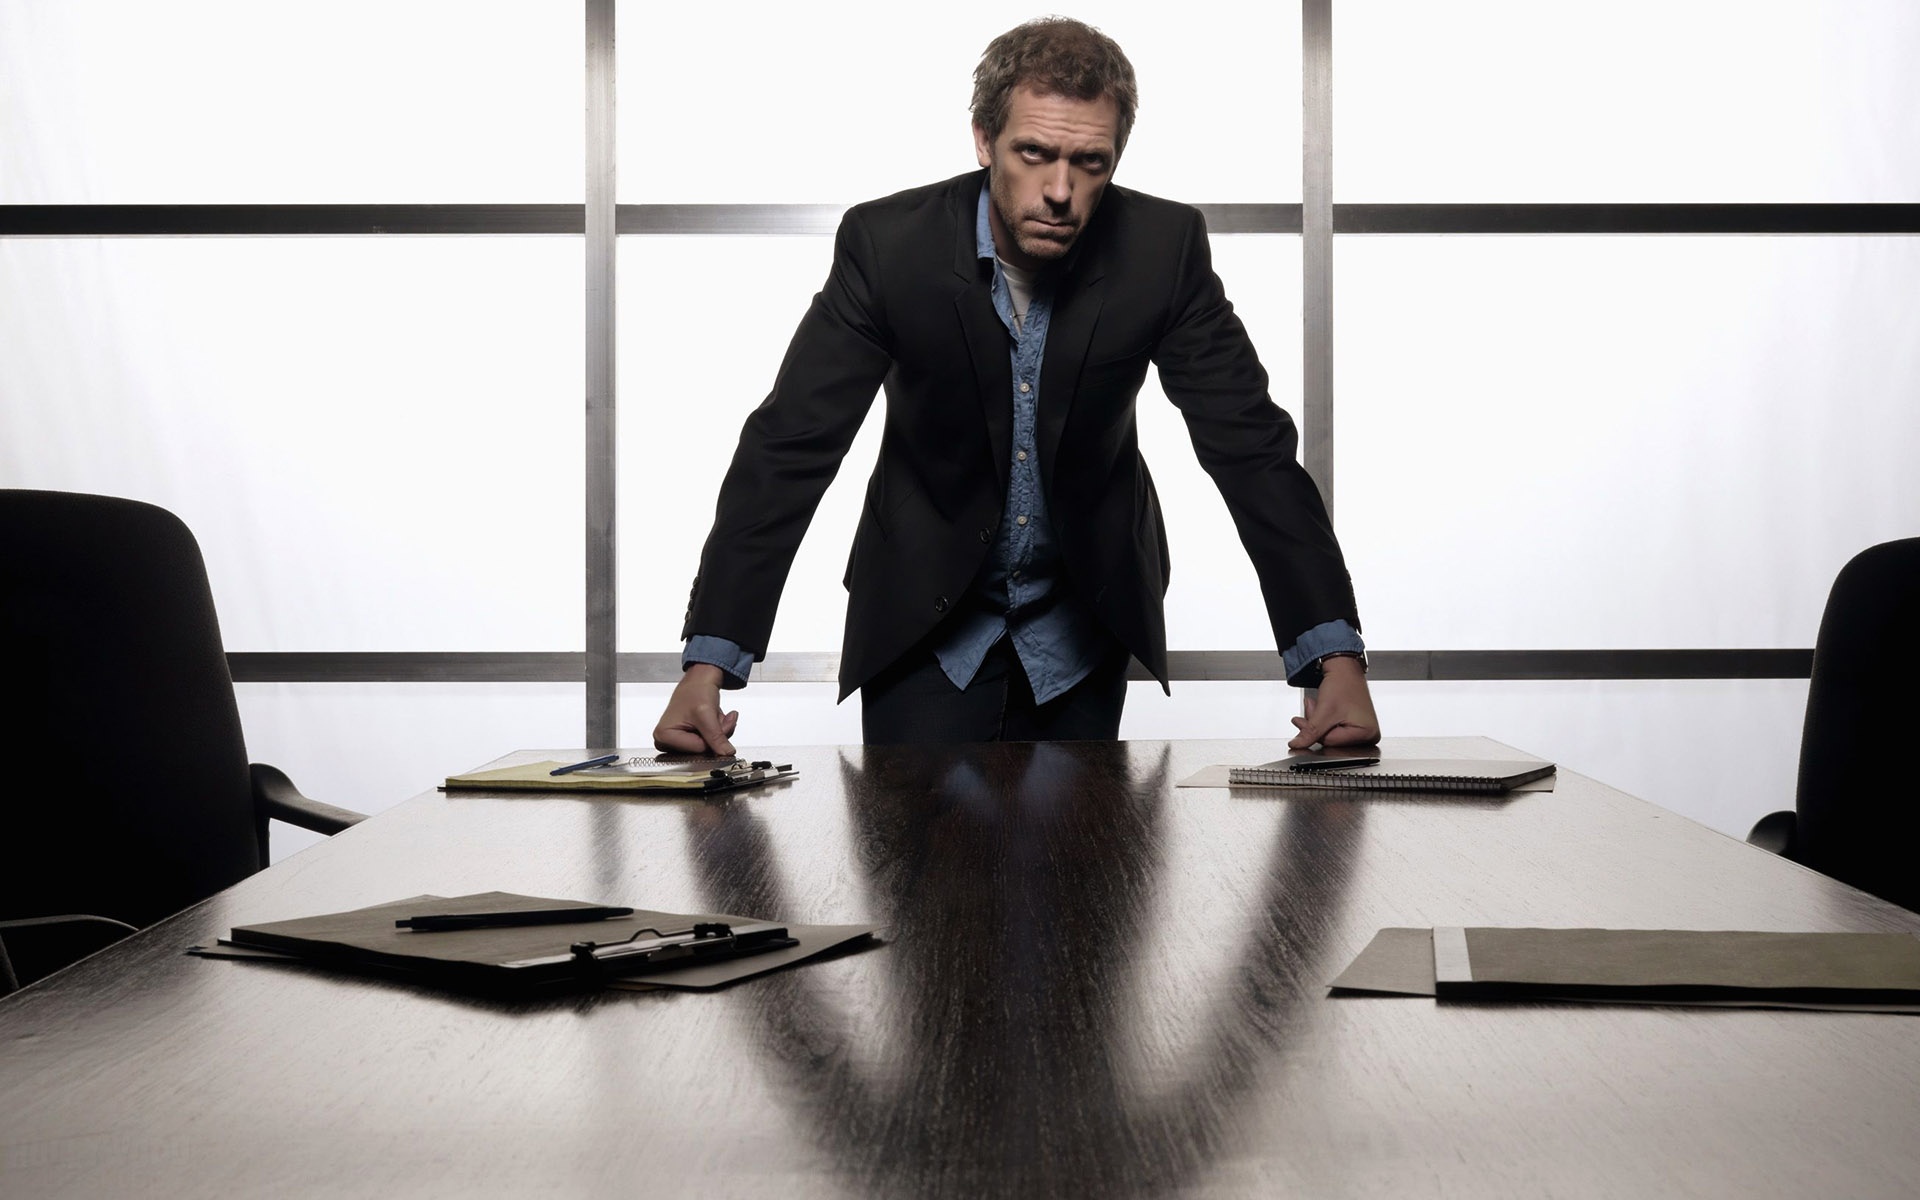 hugh-laurie-at-the-office-wallpaper-6237.jpg